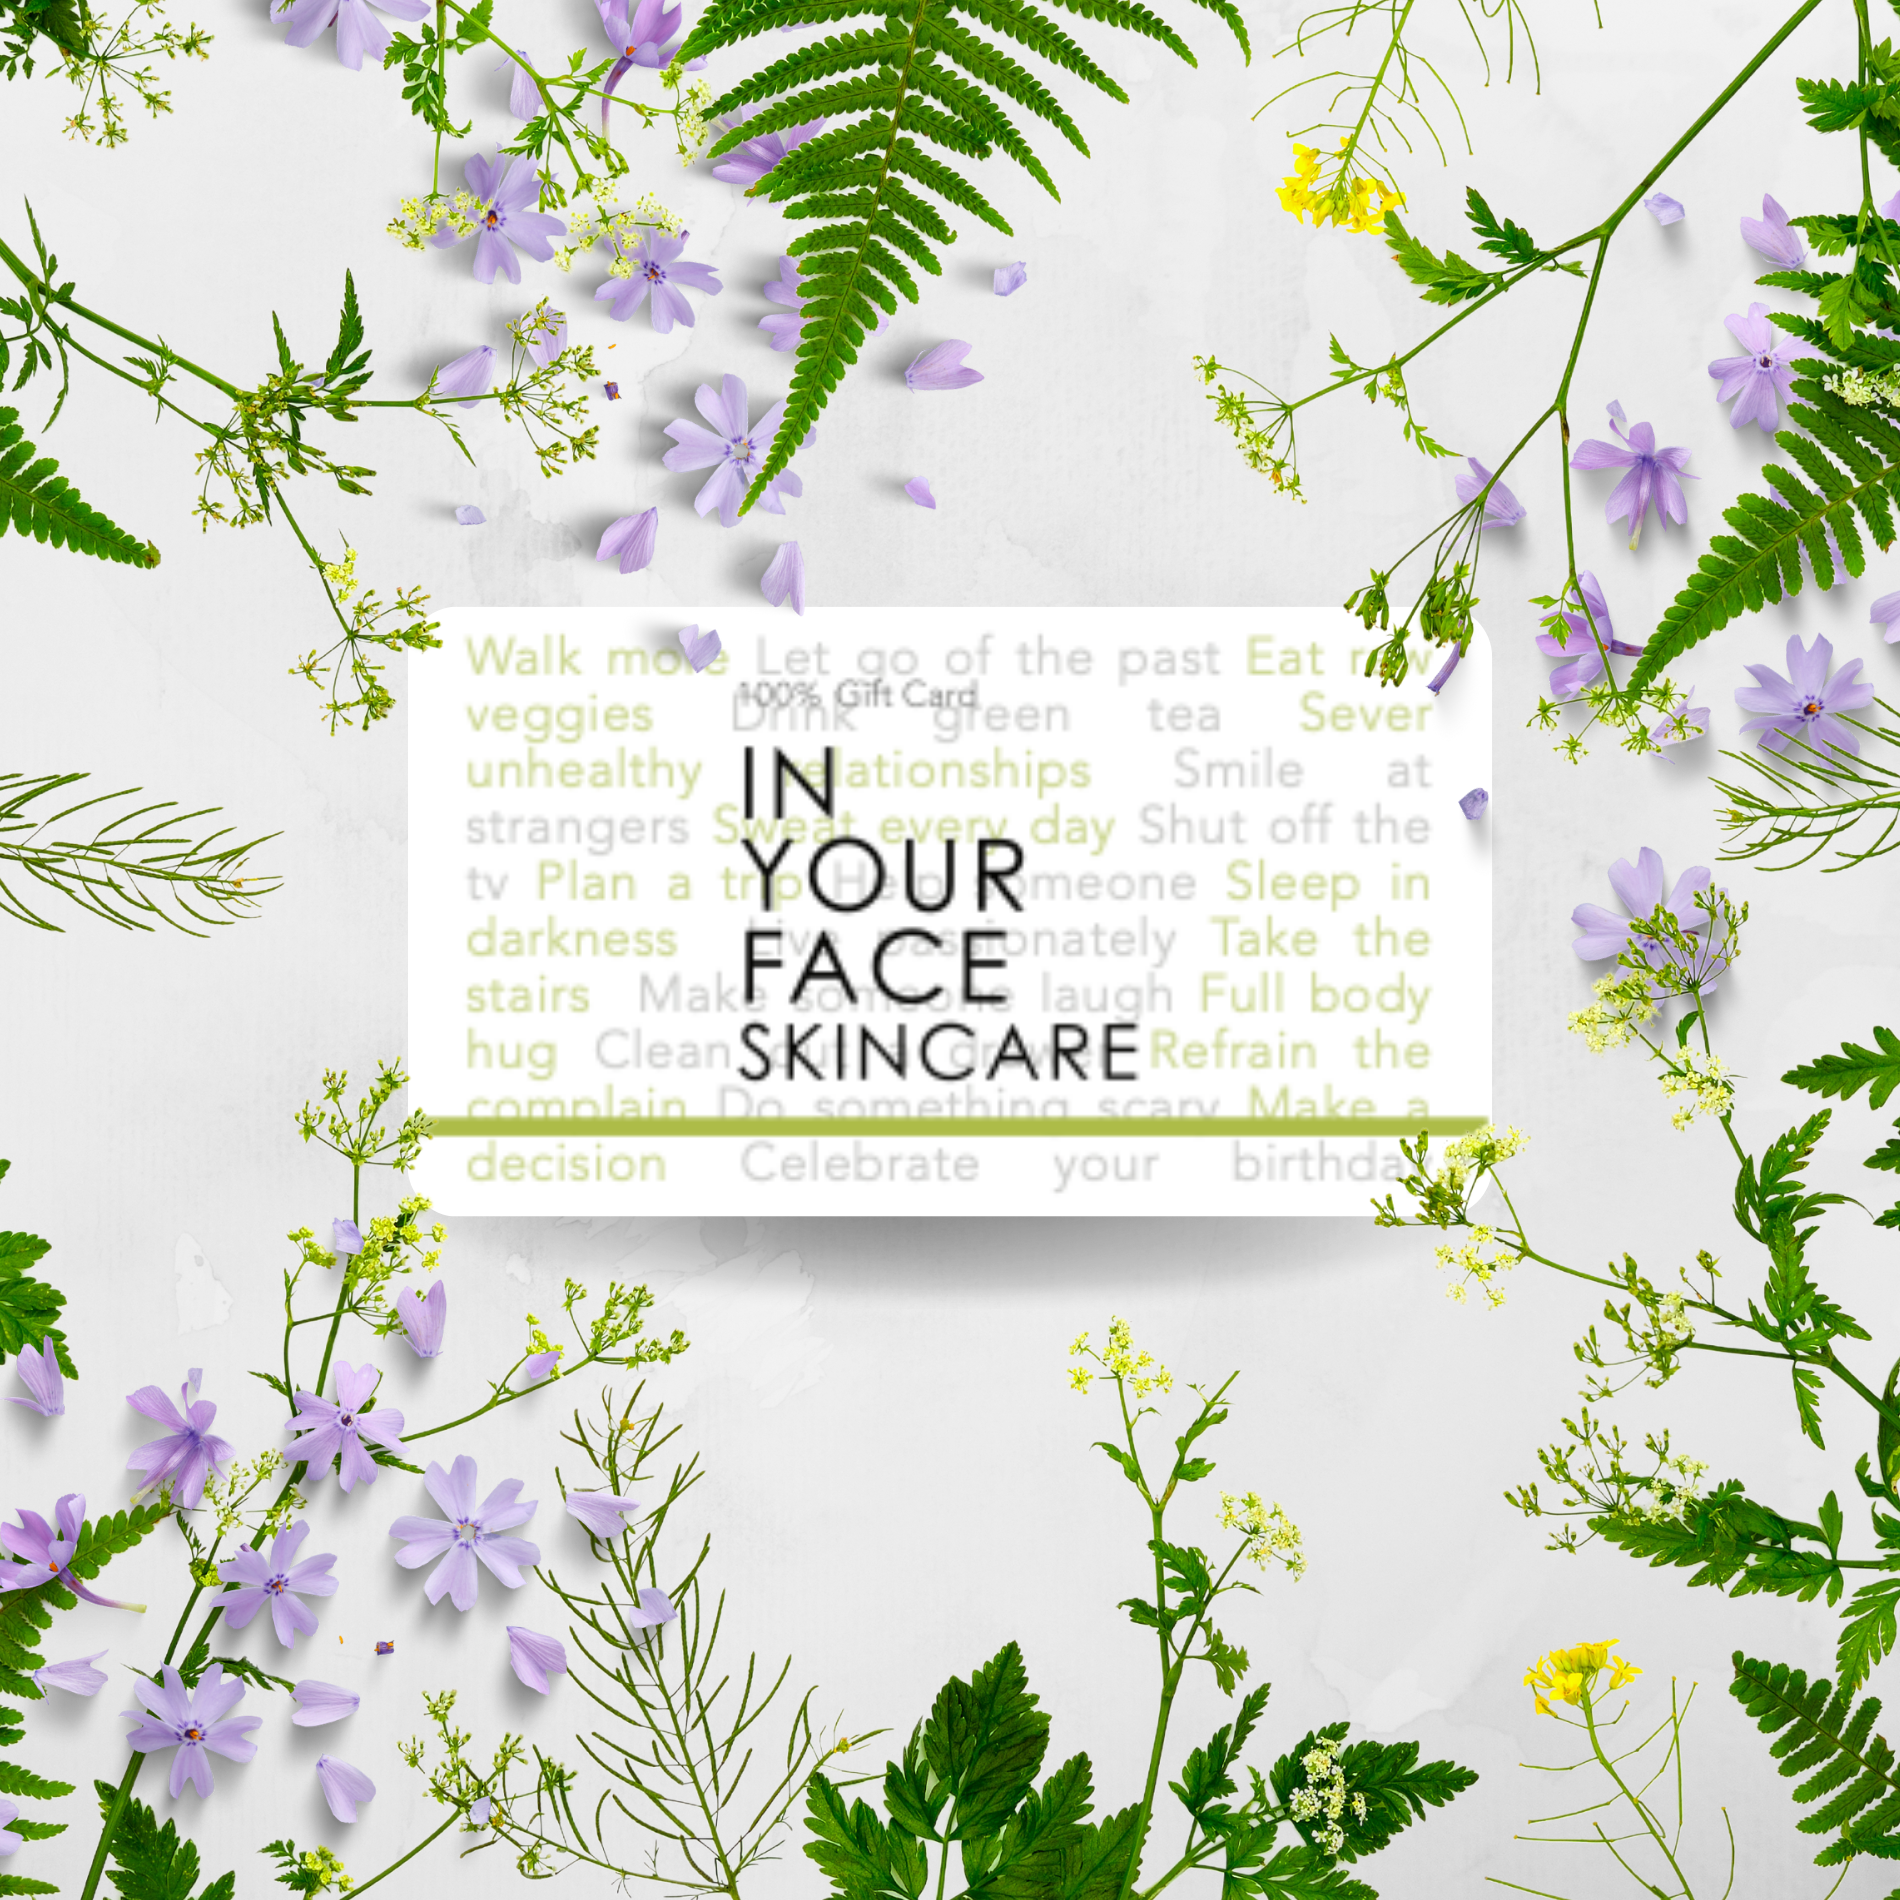 an image of a gift card on a white background that says "100% Gift Card, IN YOUR FACE SKINCARE". In the background is a bunch of ferns and purple delicate flowers